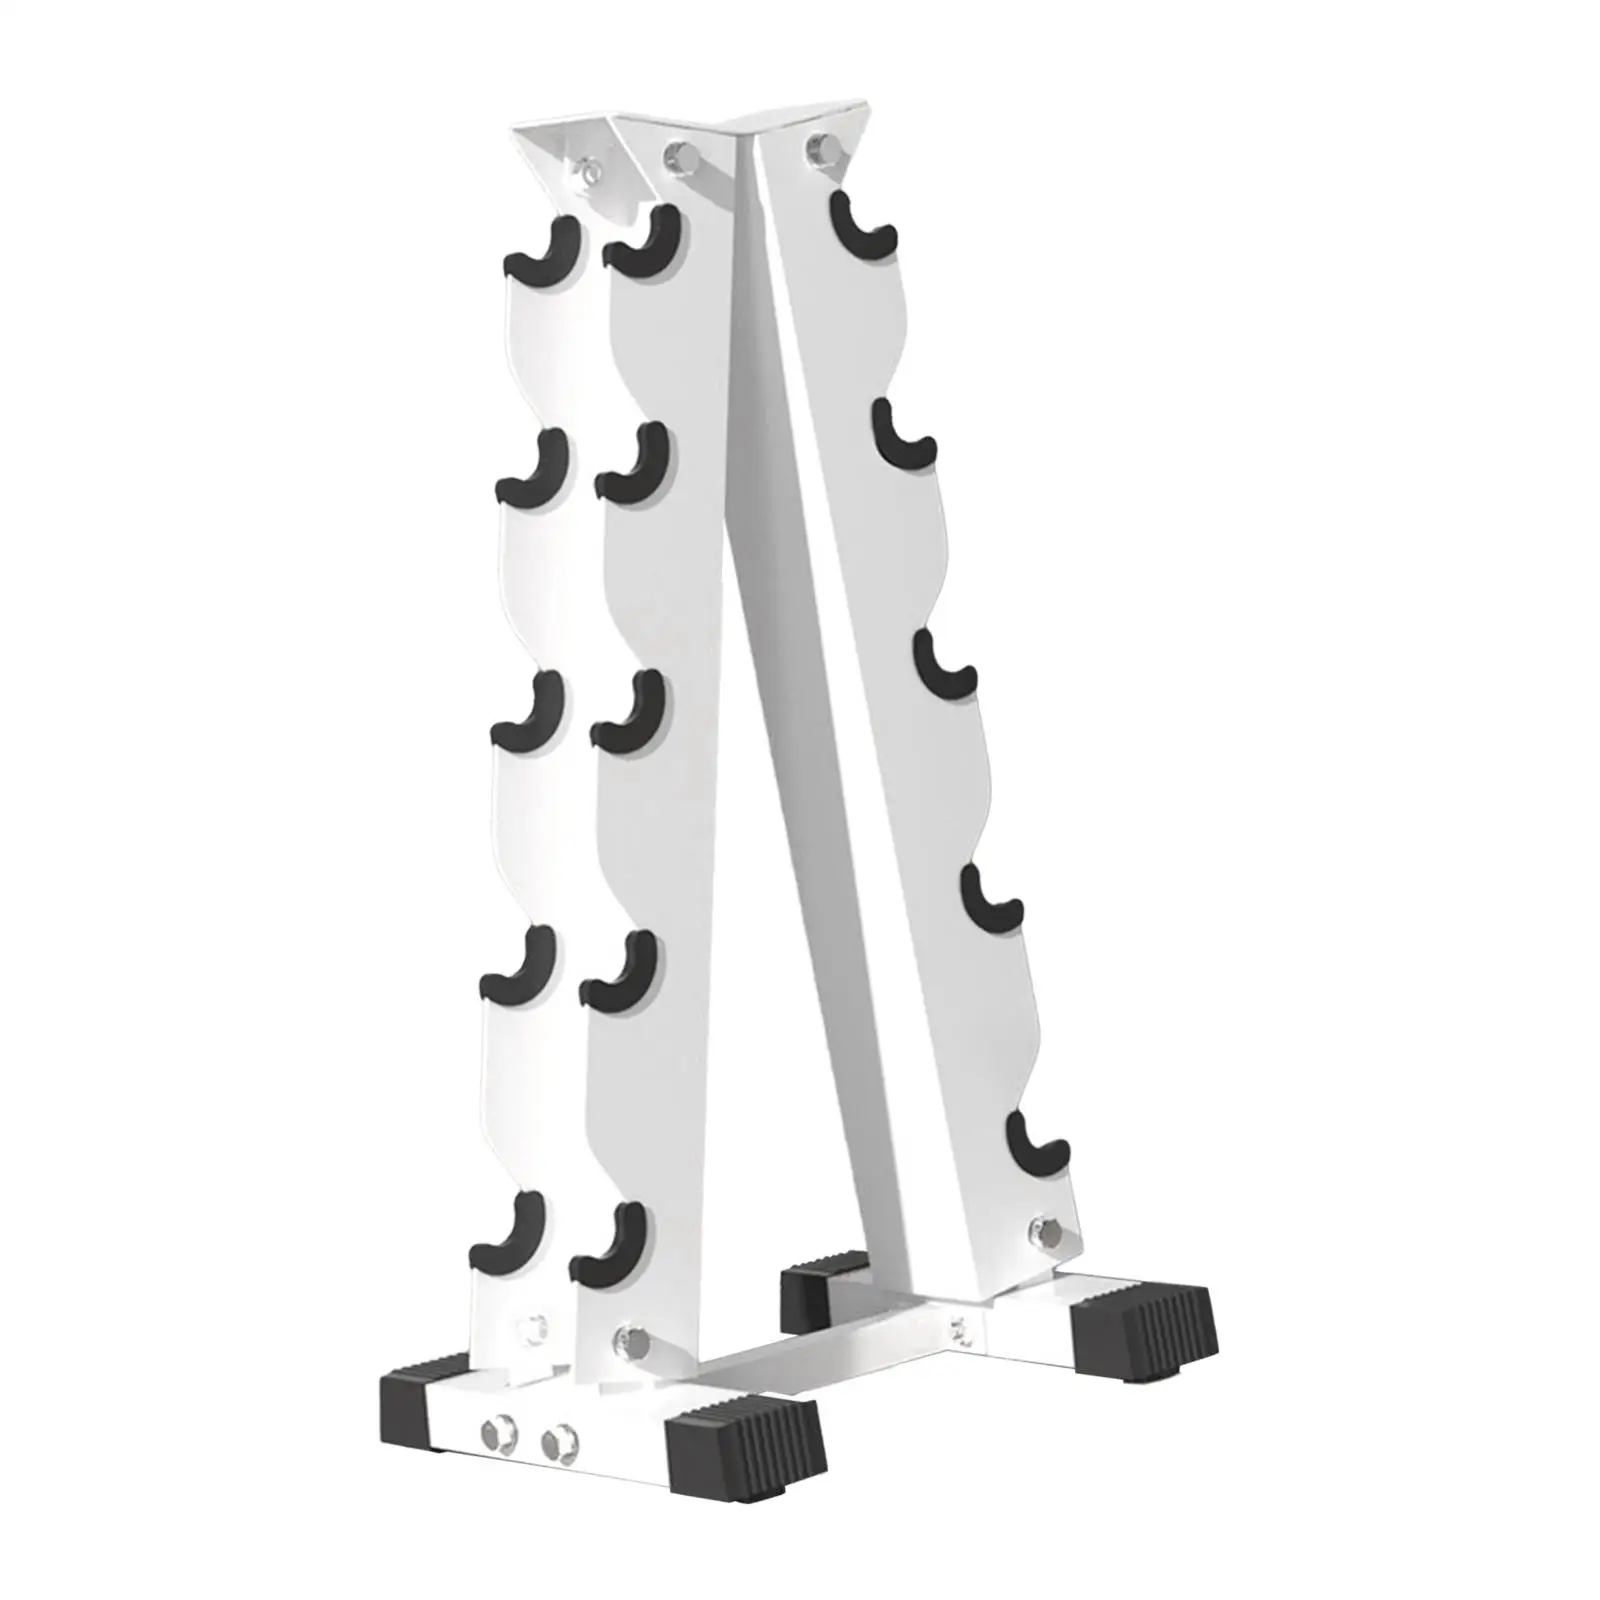 Dumbbell Rack Space Saving Sturdy Tower Stand Practical Multipurpose Compact Dumbbell Holder for Household Gym Weight Training